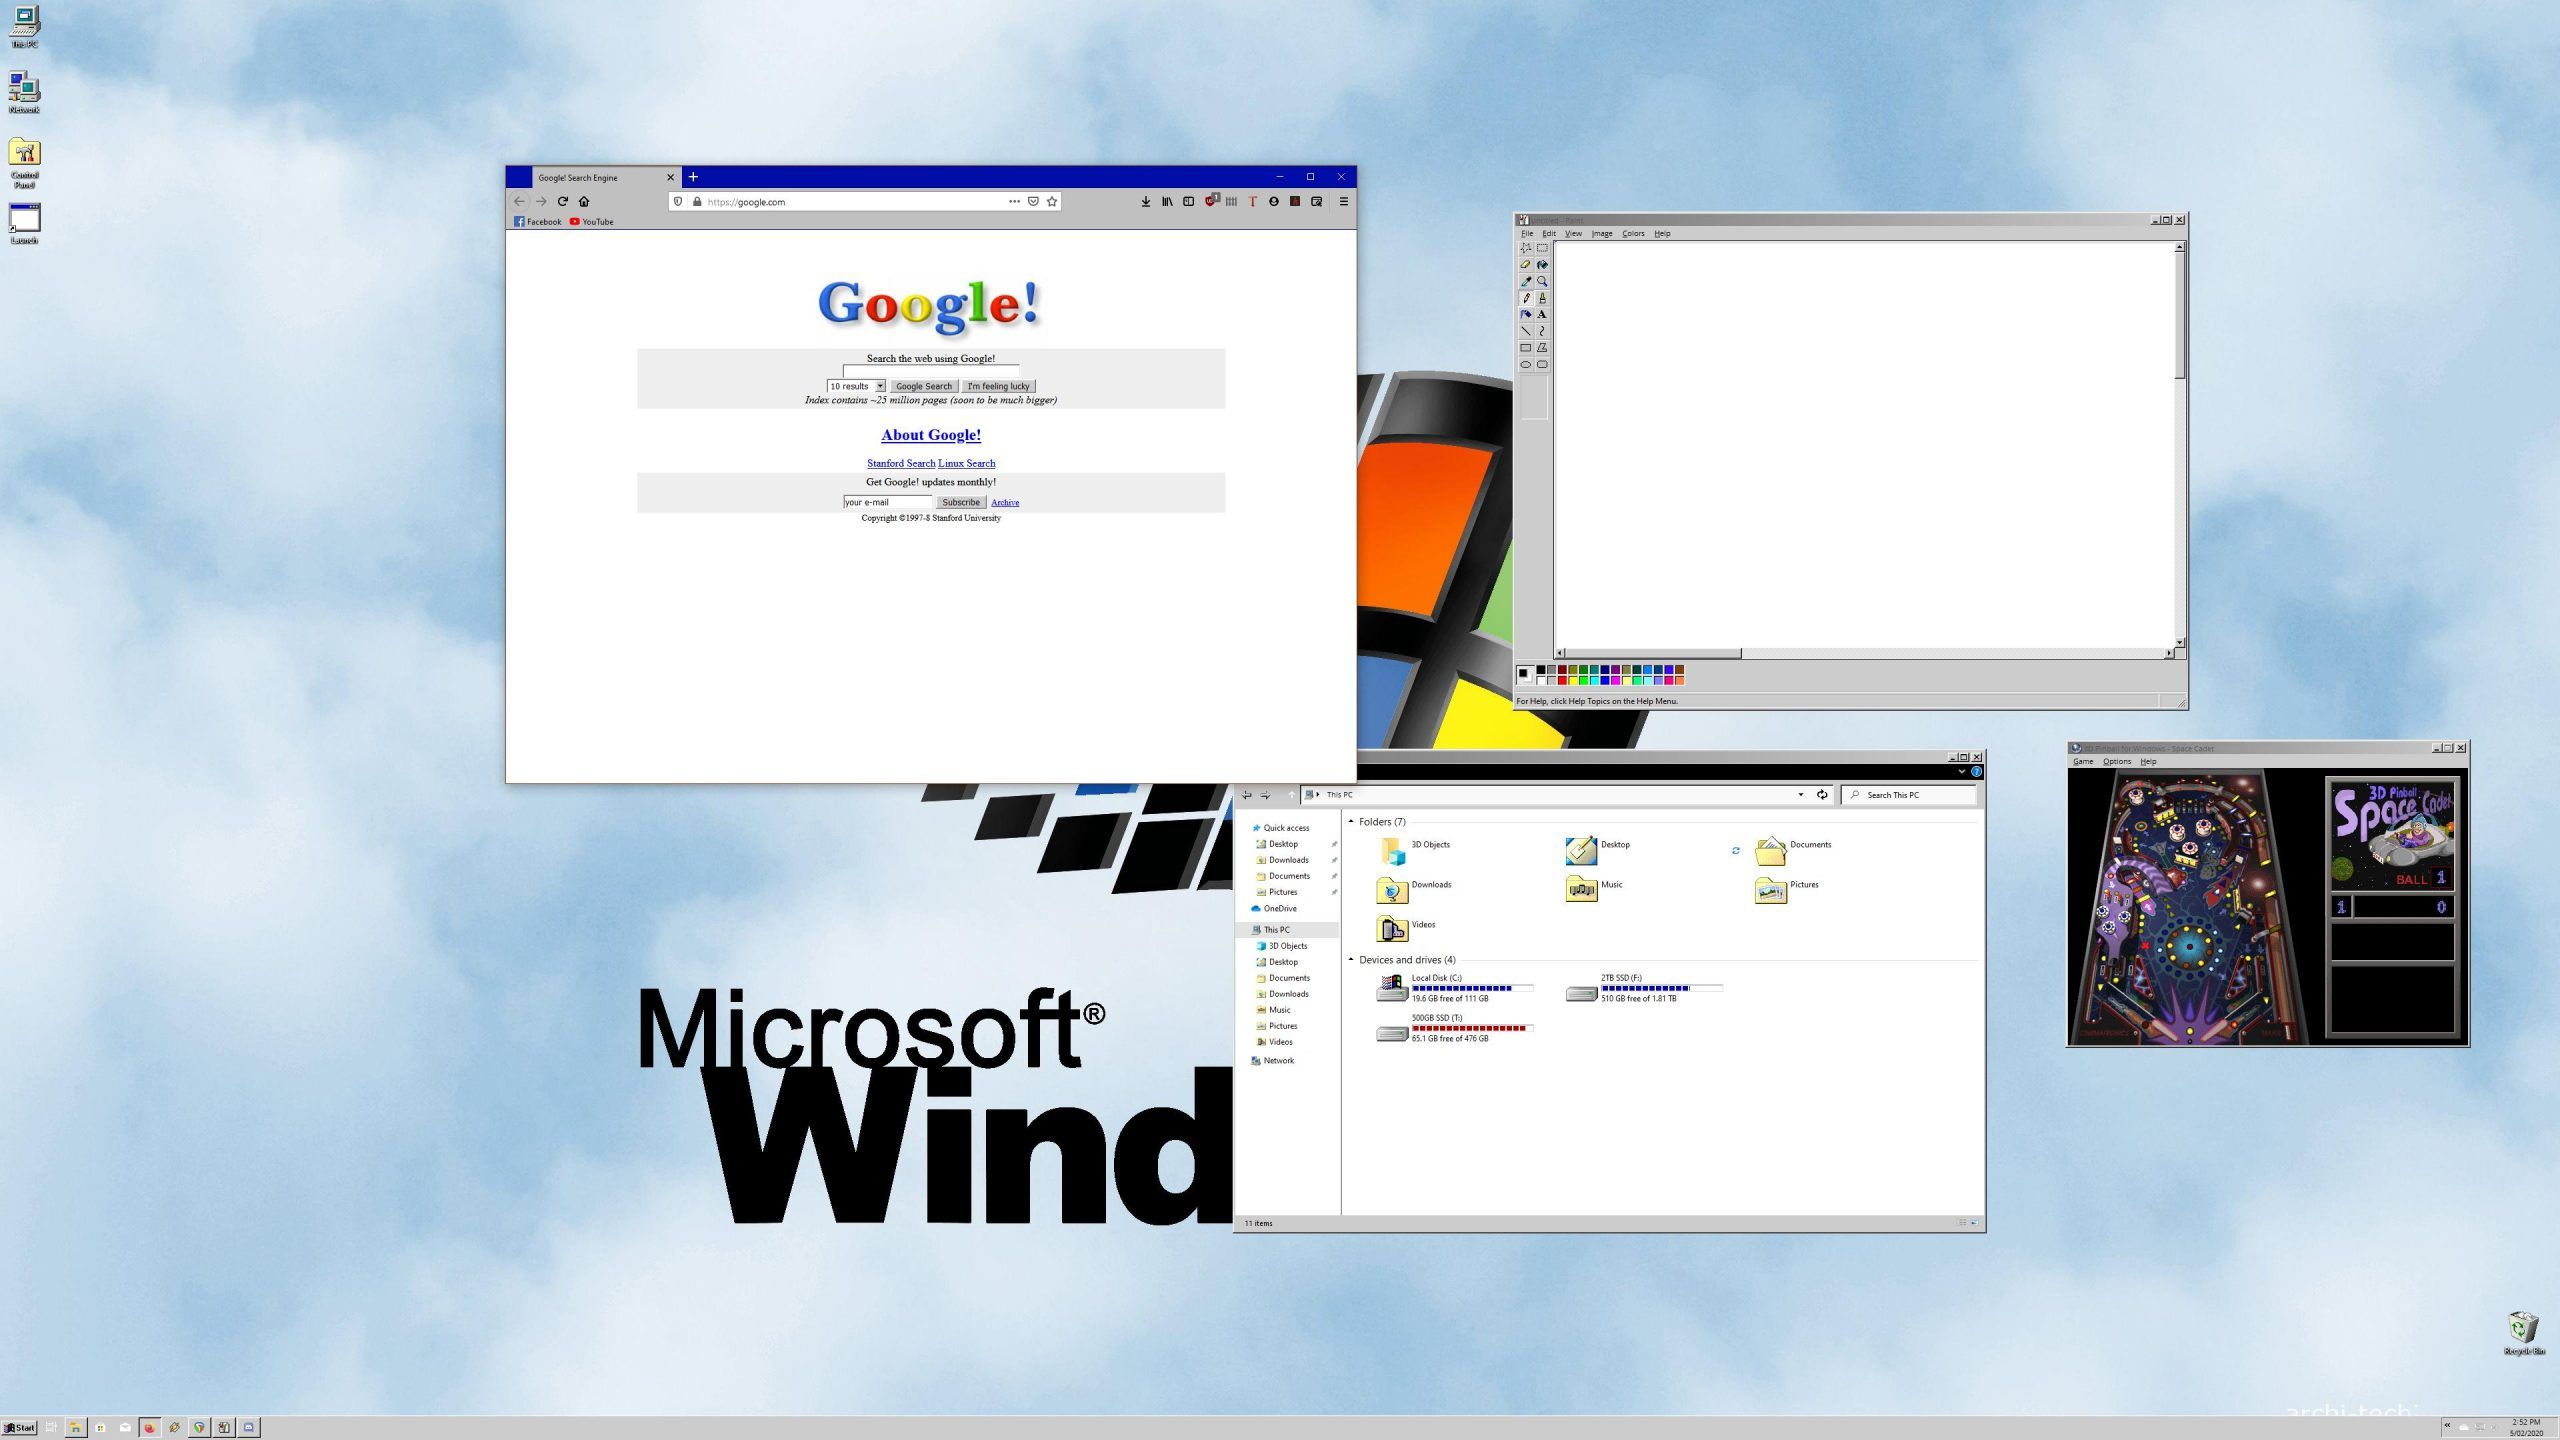 Microsoft Wind is a free operating system that runs on top of Windows. - Windows 98